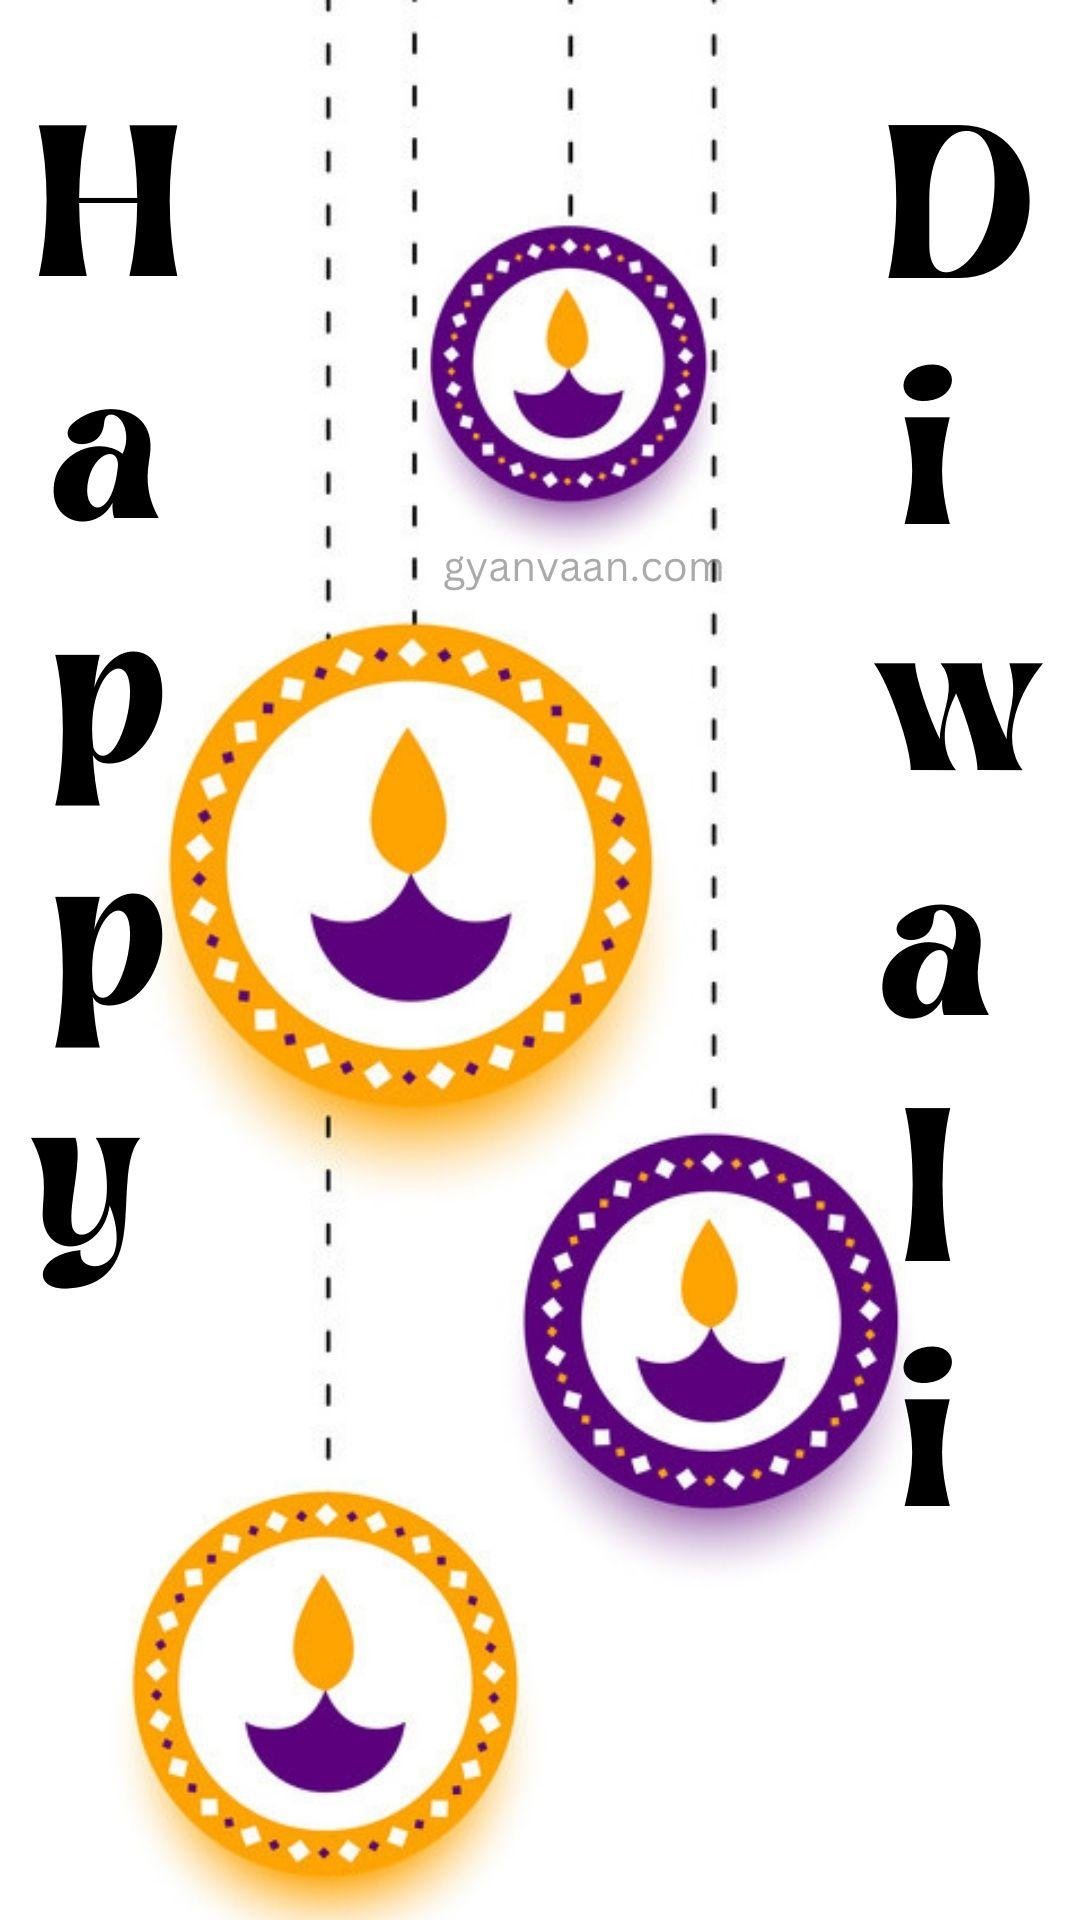 Diwali Quotes In Hindi With Wishes26 - Diwali Quotes In Hindi